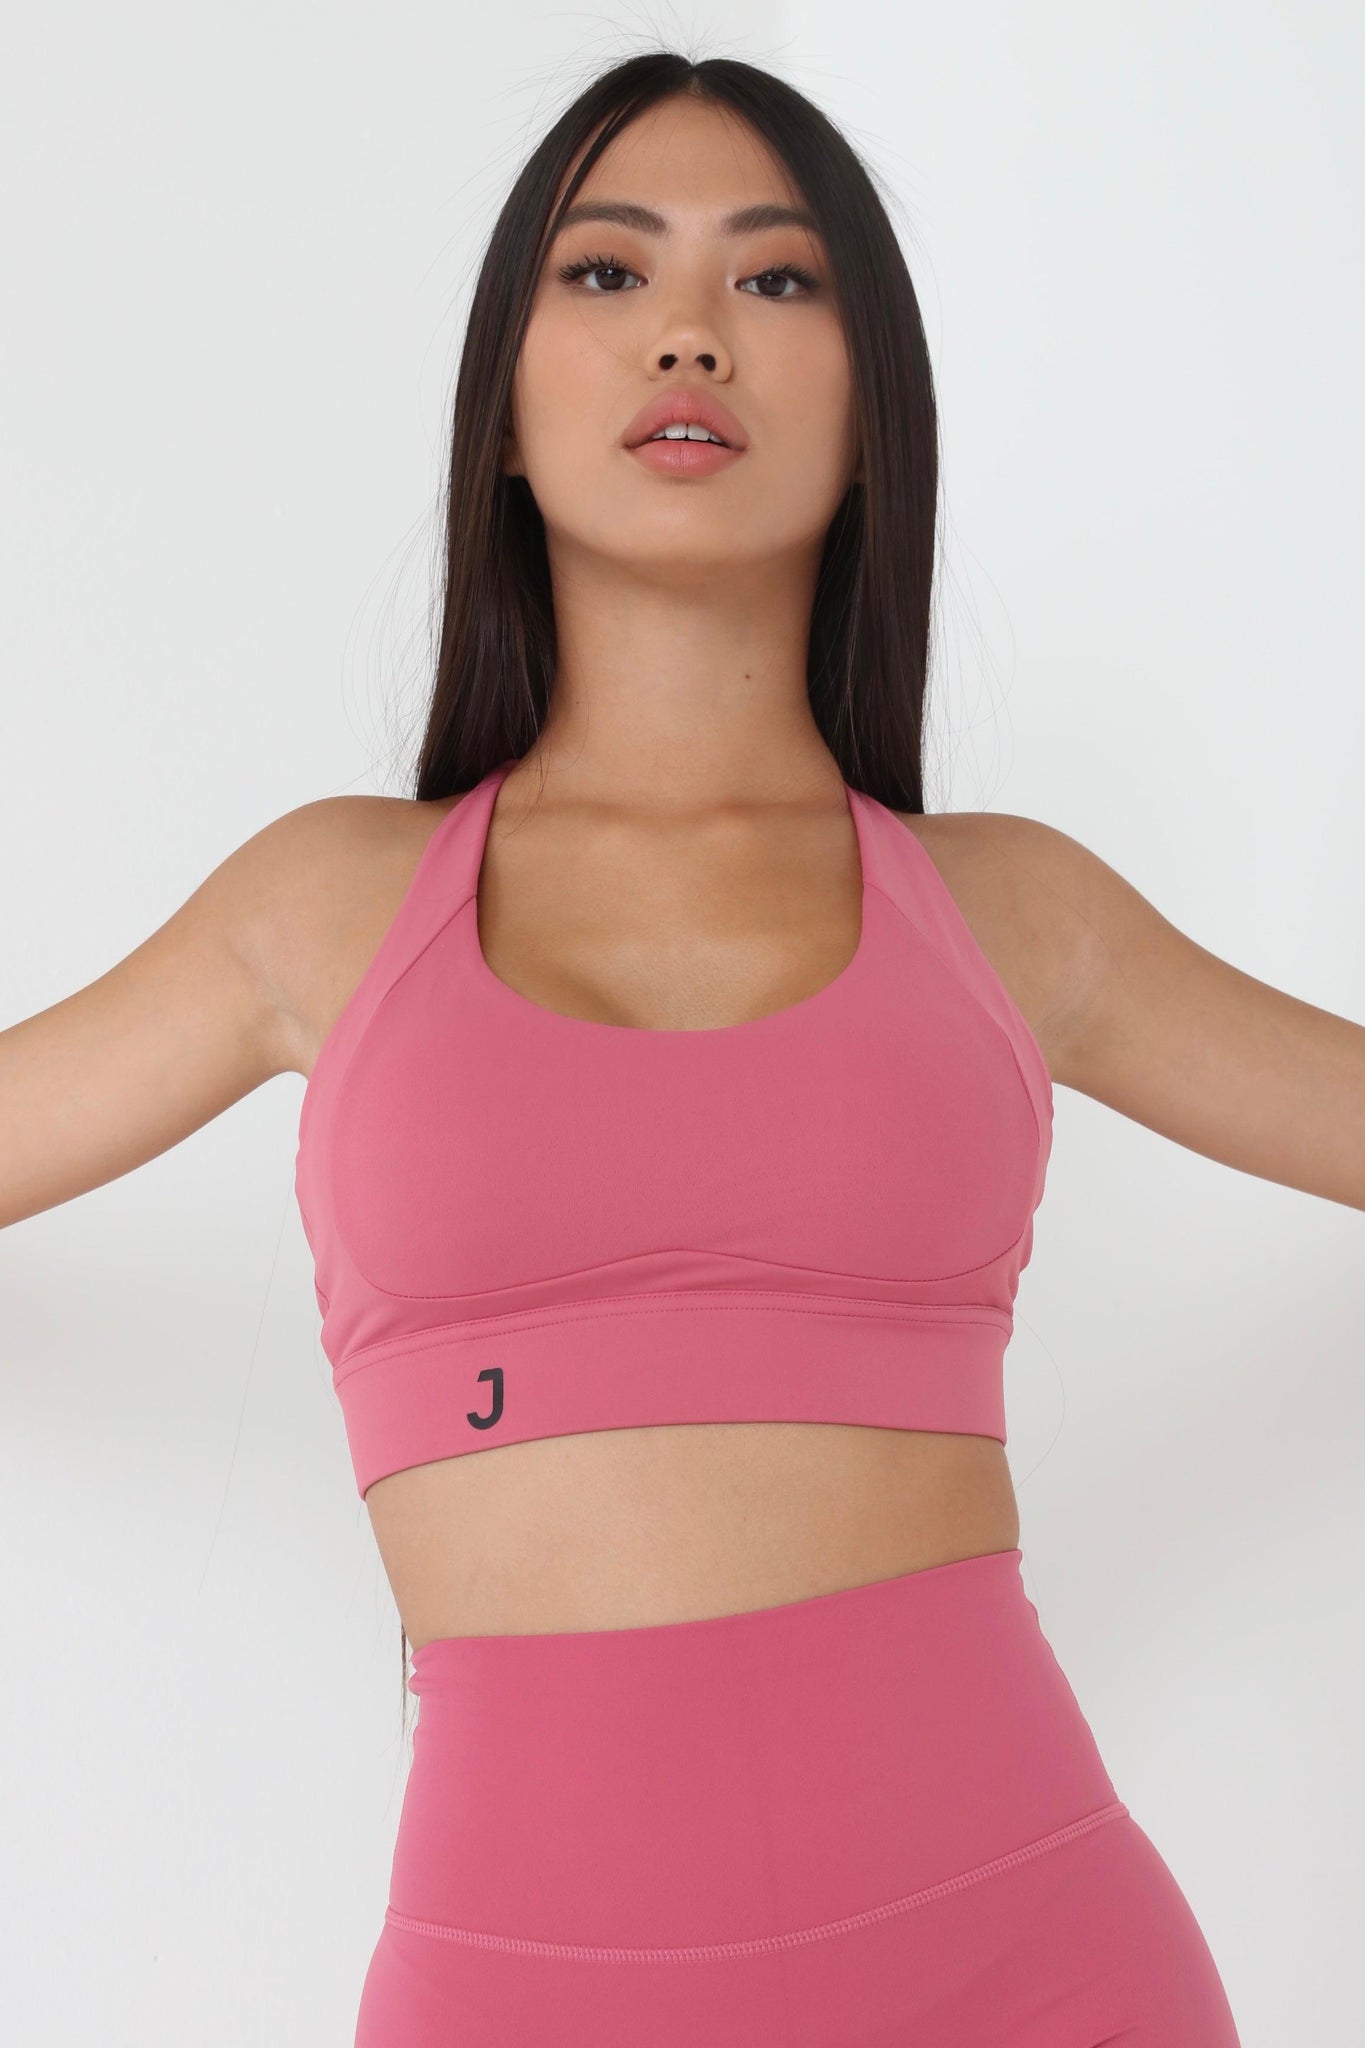 JUV fresh bra in pink color, close up front view.